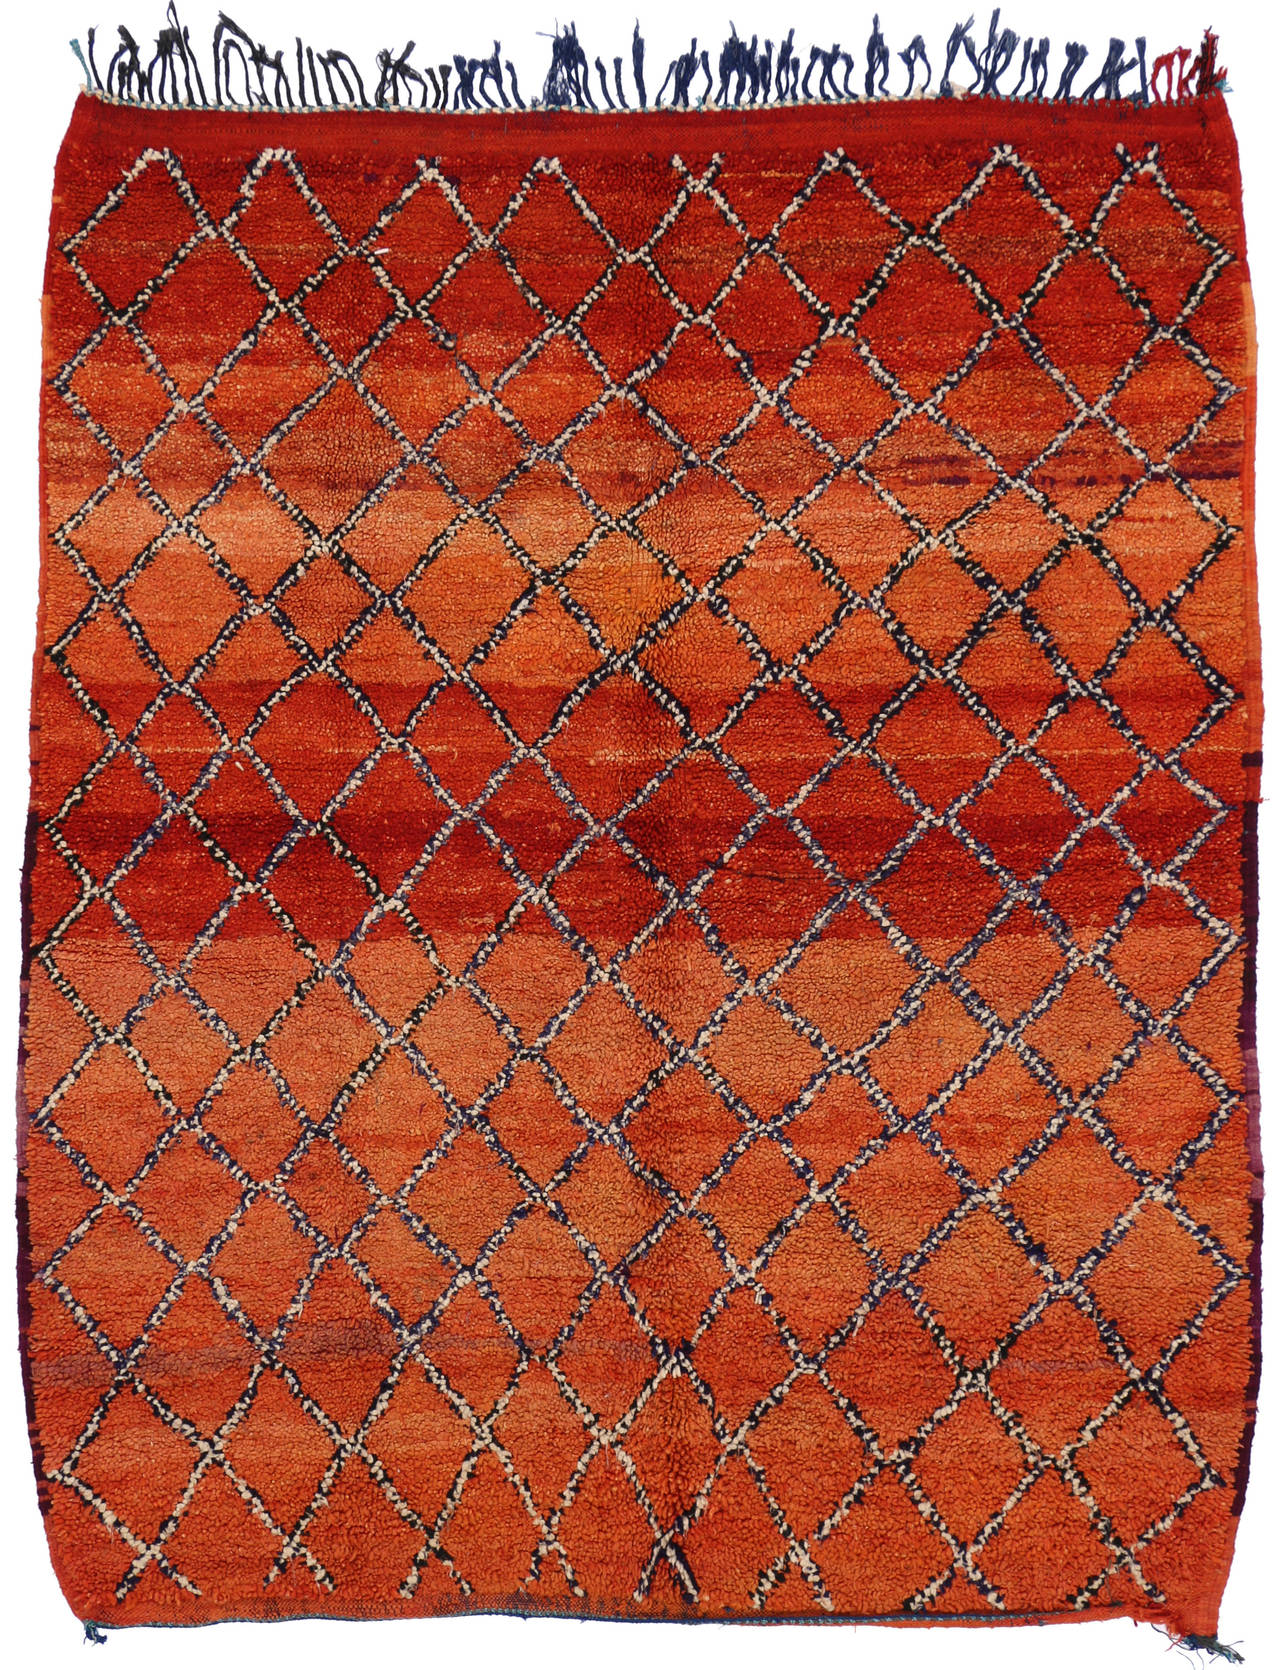 Hand-Knotted Contemporary Berber Moroccan Rug with Retro Mid-Century Modern Style